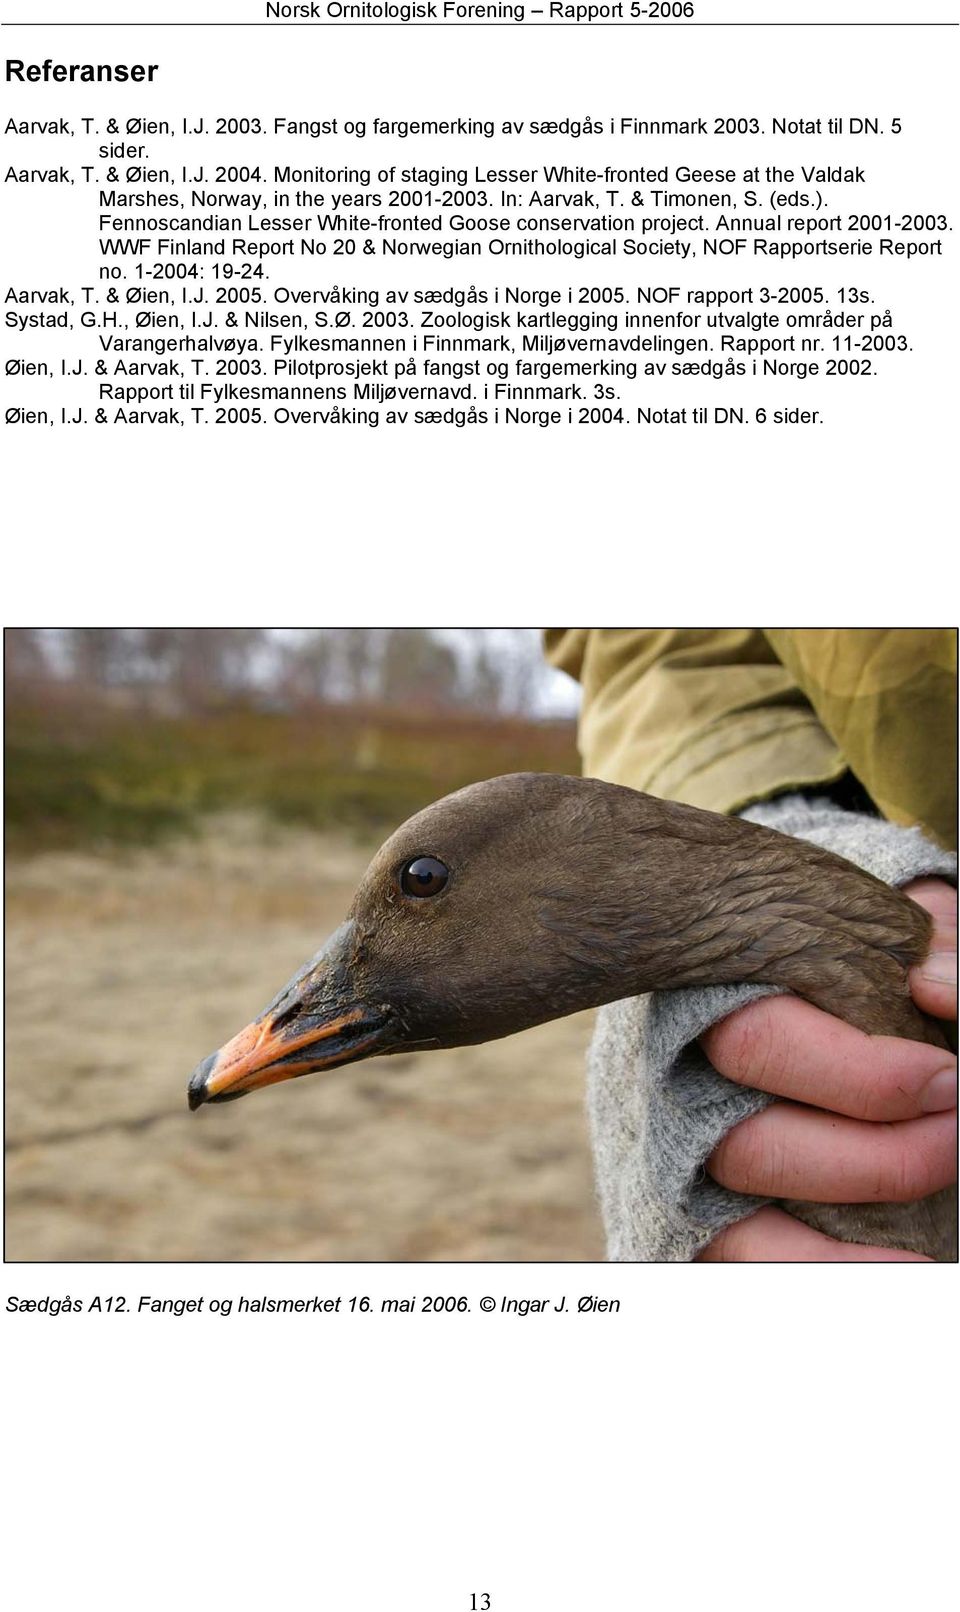 Fennoscandian Lesser White-fronted Goose conservation project. Annual report 2001-2003. WWF Finland Report No 20 & Norwegian Ornithological Society, NOF Rapportserie Report no. 1-2004: 19-24.